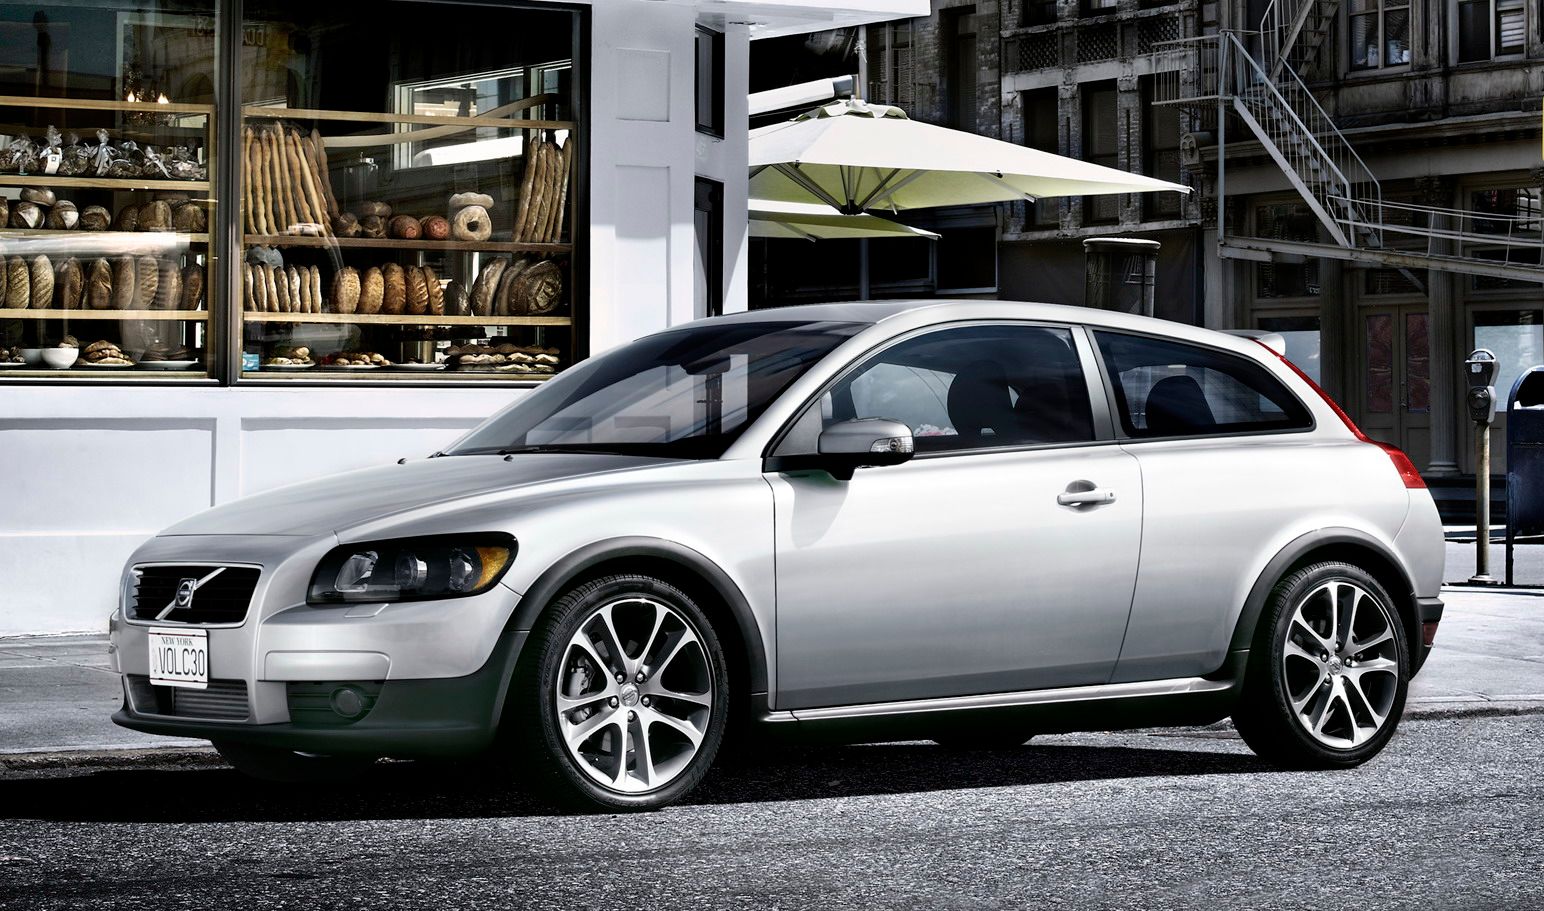 Volvo C30 - one of the main competitors of the 9-1